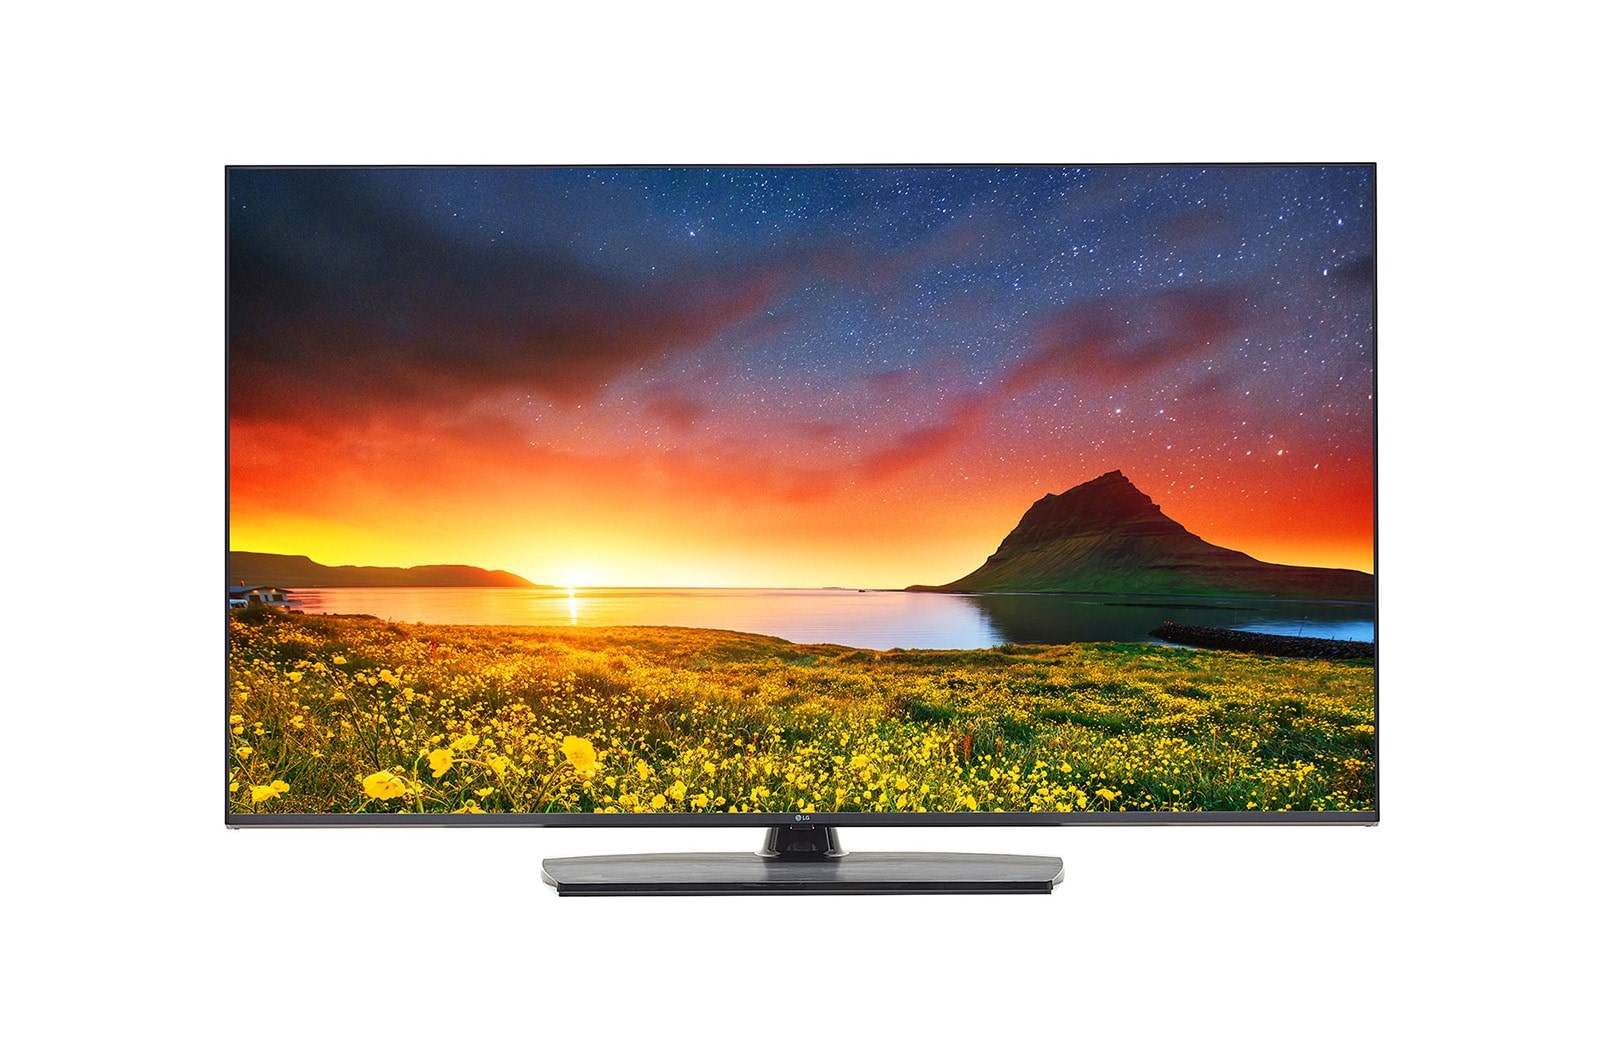 LG 55" 4K UHD Hospitality TV with Pro:Centric Direct, 55UR765H0VC